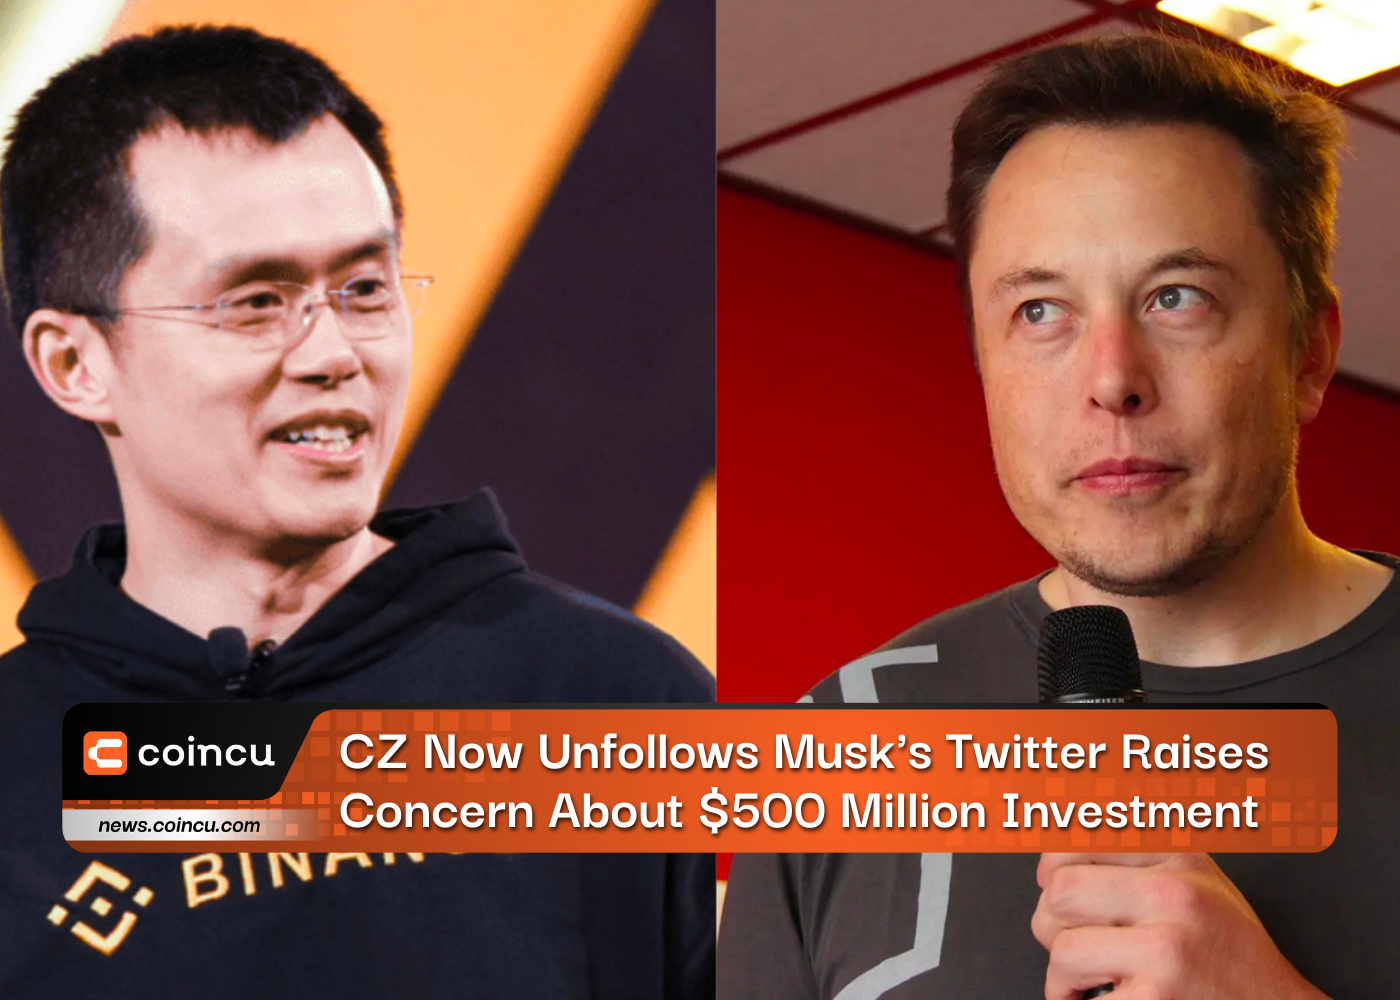 CZ Now Unfollows Musk's Twitter Raises Concern About $500 Million Investment